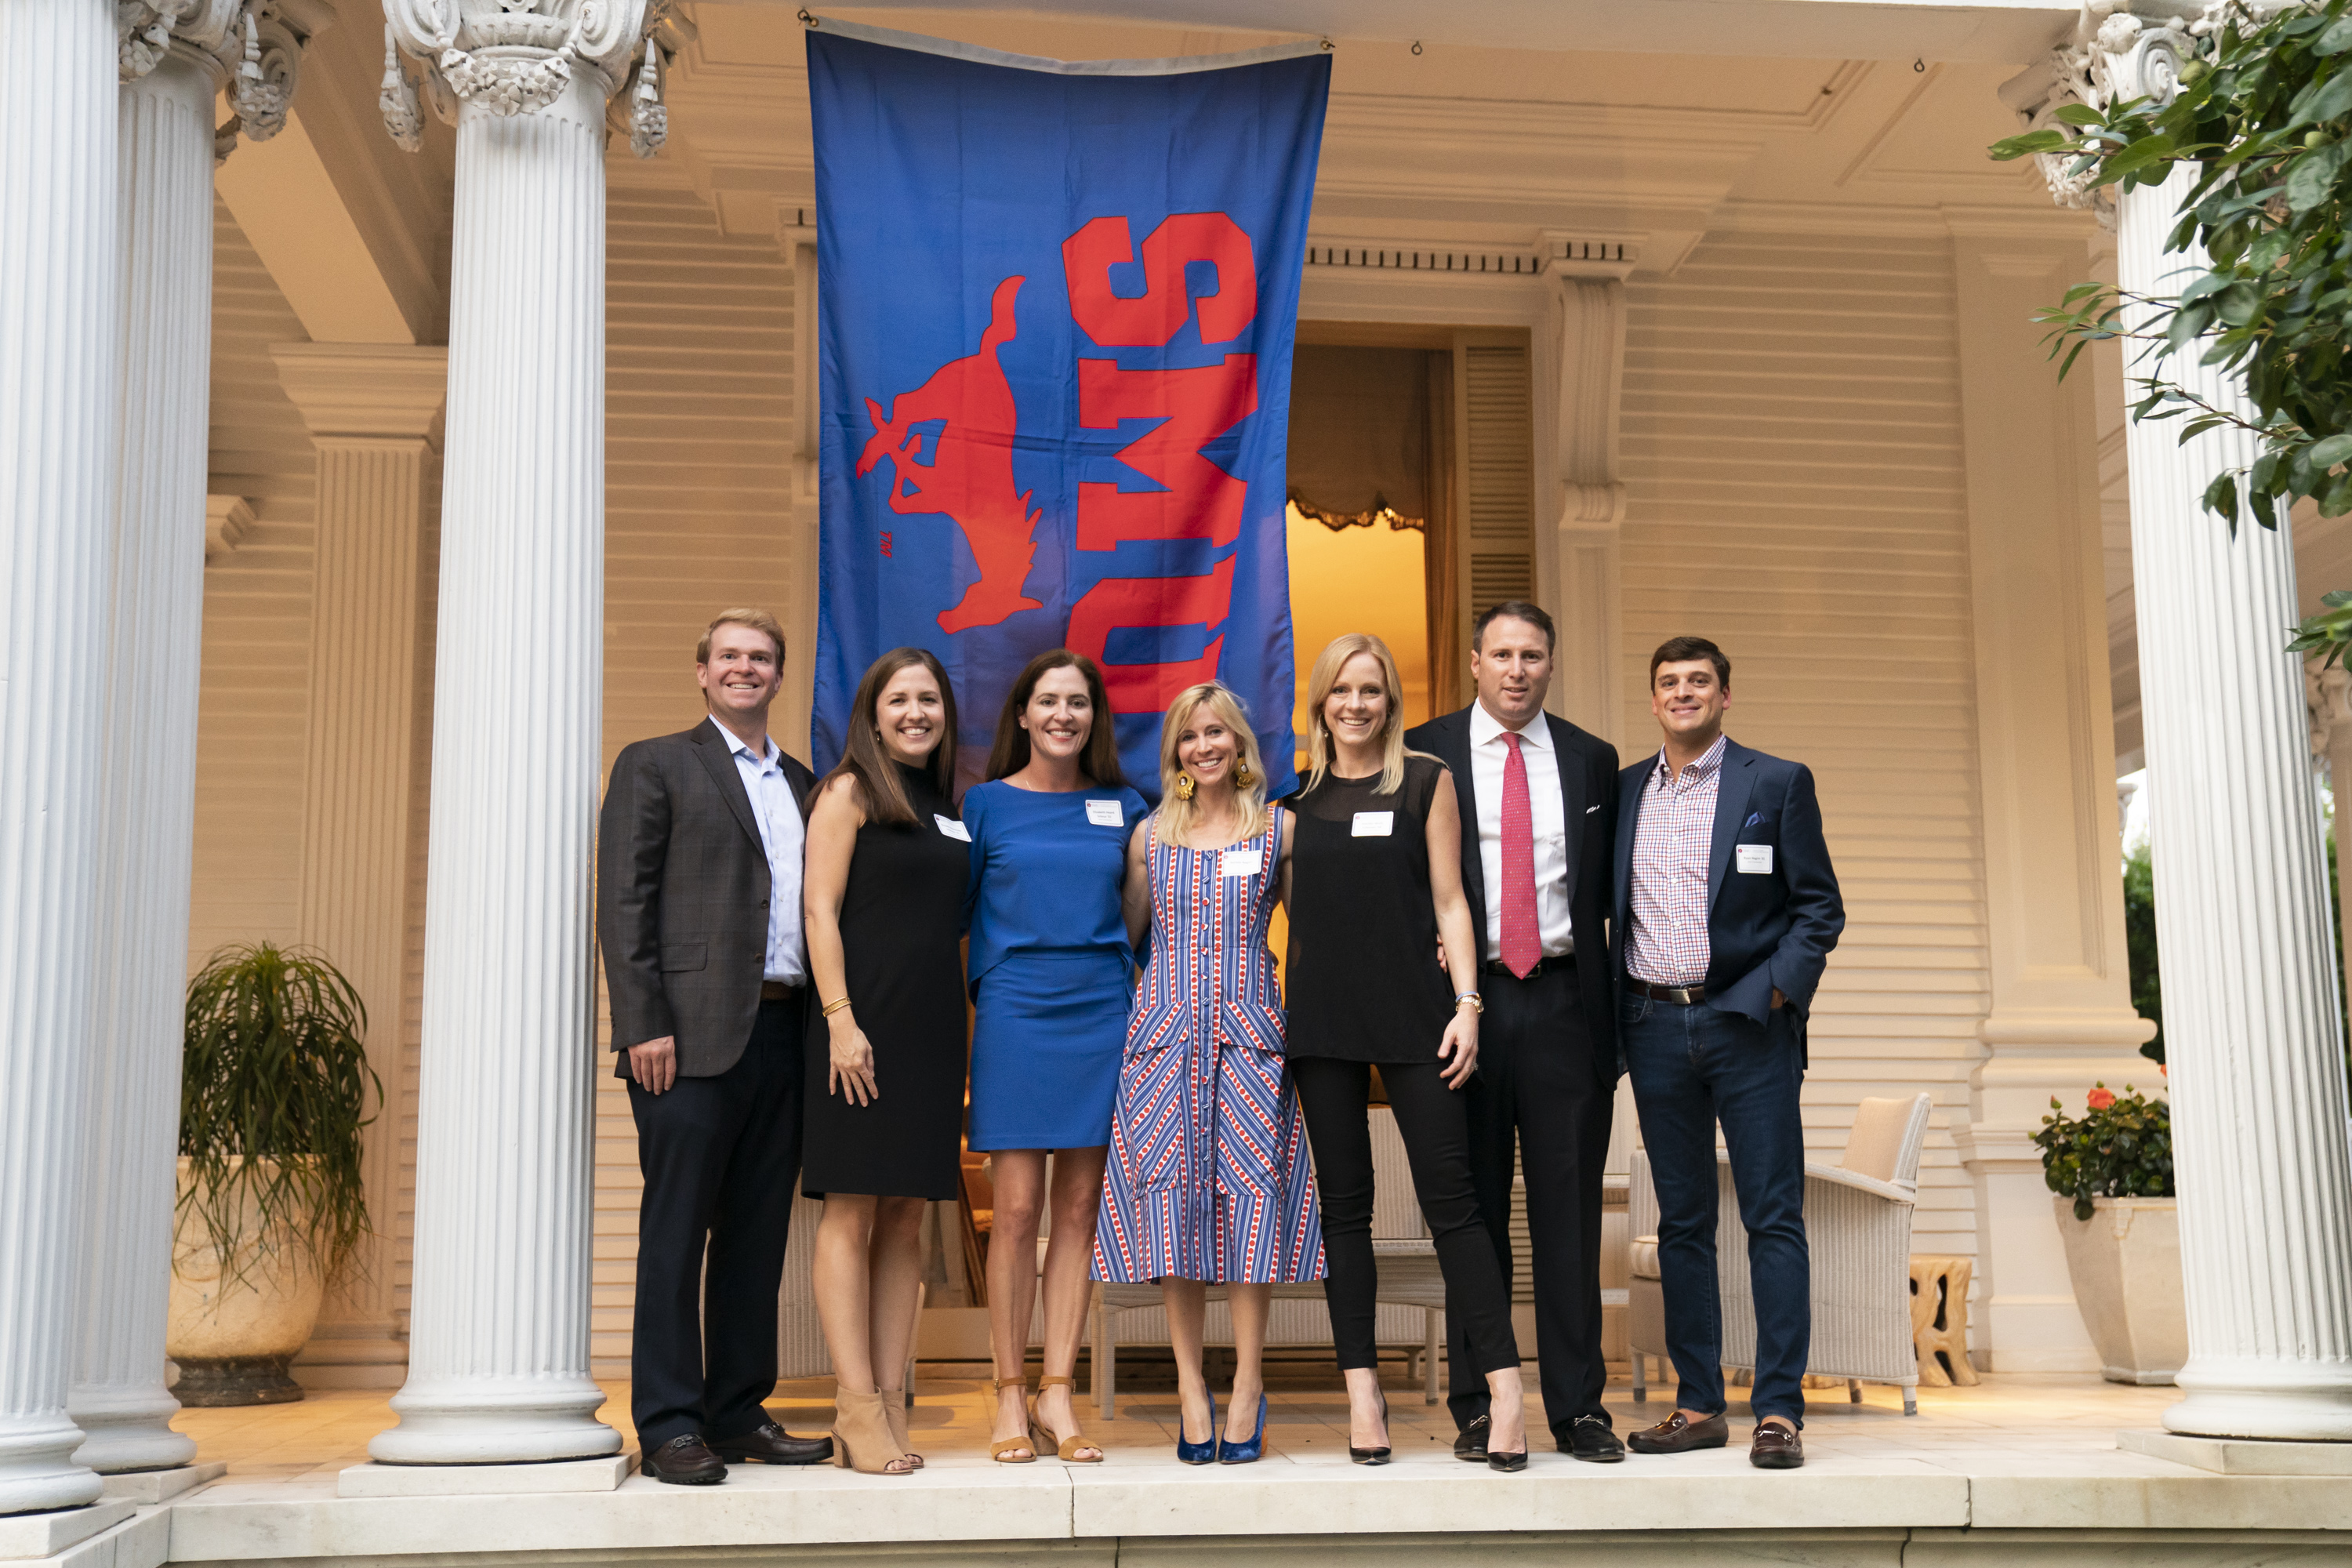 Guests stand outside of the Wedding Cake House in front of an SMU flag.